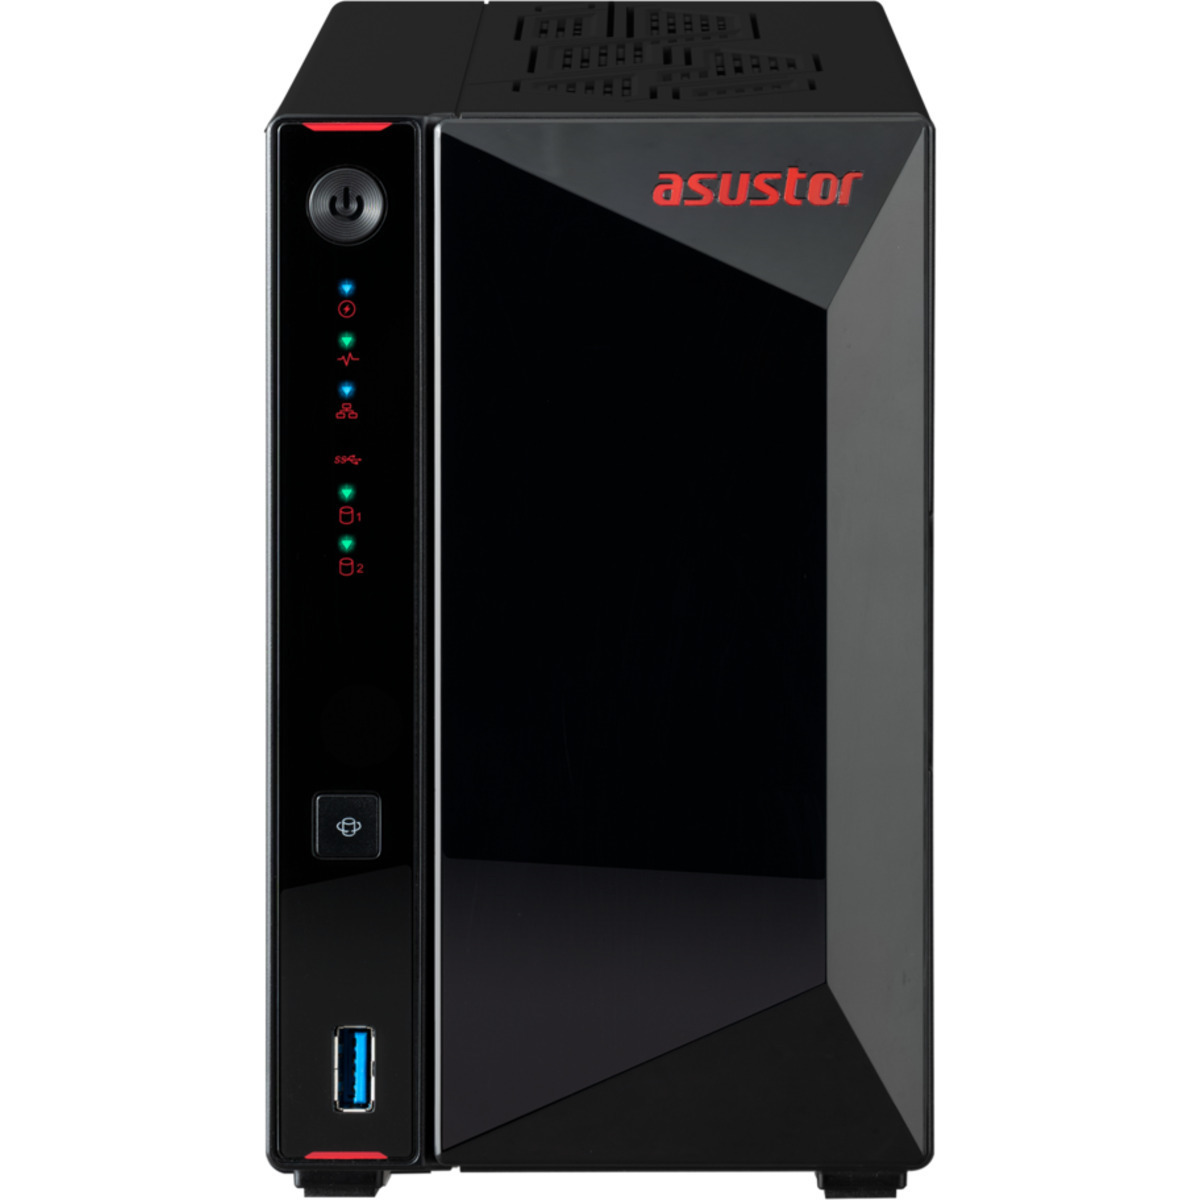 buy ASUSTOR Nimbustor 2 Gen2 AS5402T 44tb Desktop NAS - Network Attached Storage Device 2x22000gb Seagate IronWolf Pro ST22000NT001 3.5 7200rpm SATA 6Gb/s HDD NAS Class Drives Installed - Burn-In Tested - FREE RAM UPGRADE - nas headquarters buy network attached storage server device das new raid-5 free shipping simply usa Nimbustor 2 Gen2 AS5402T